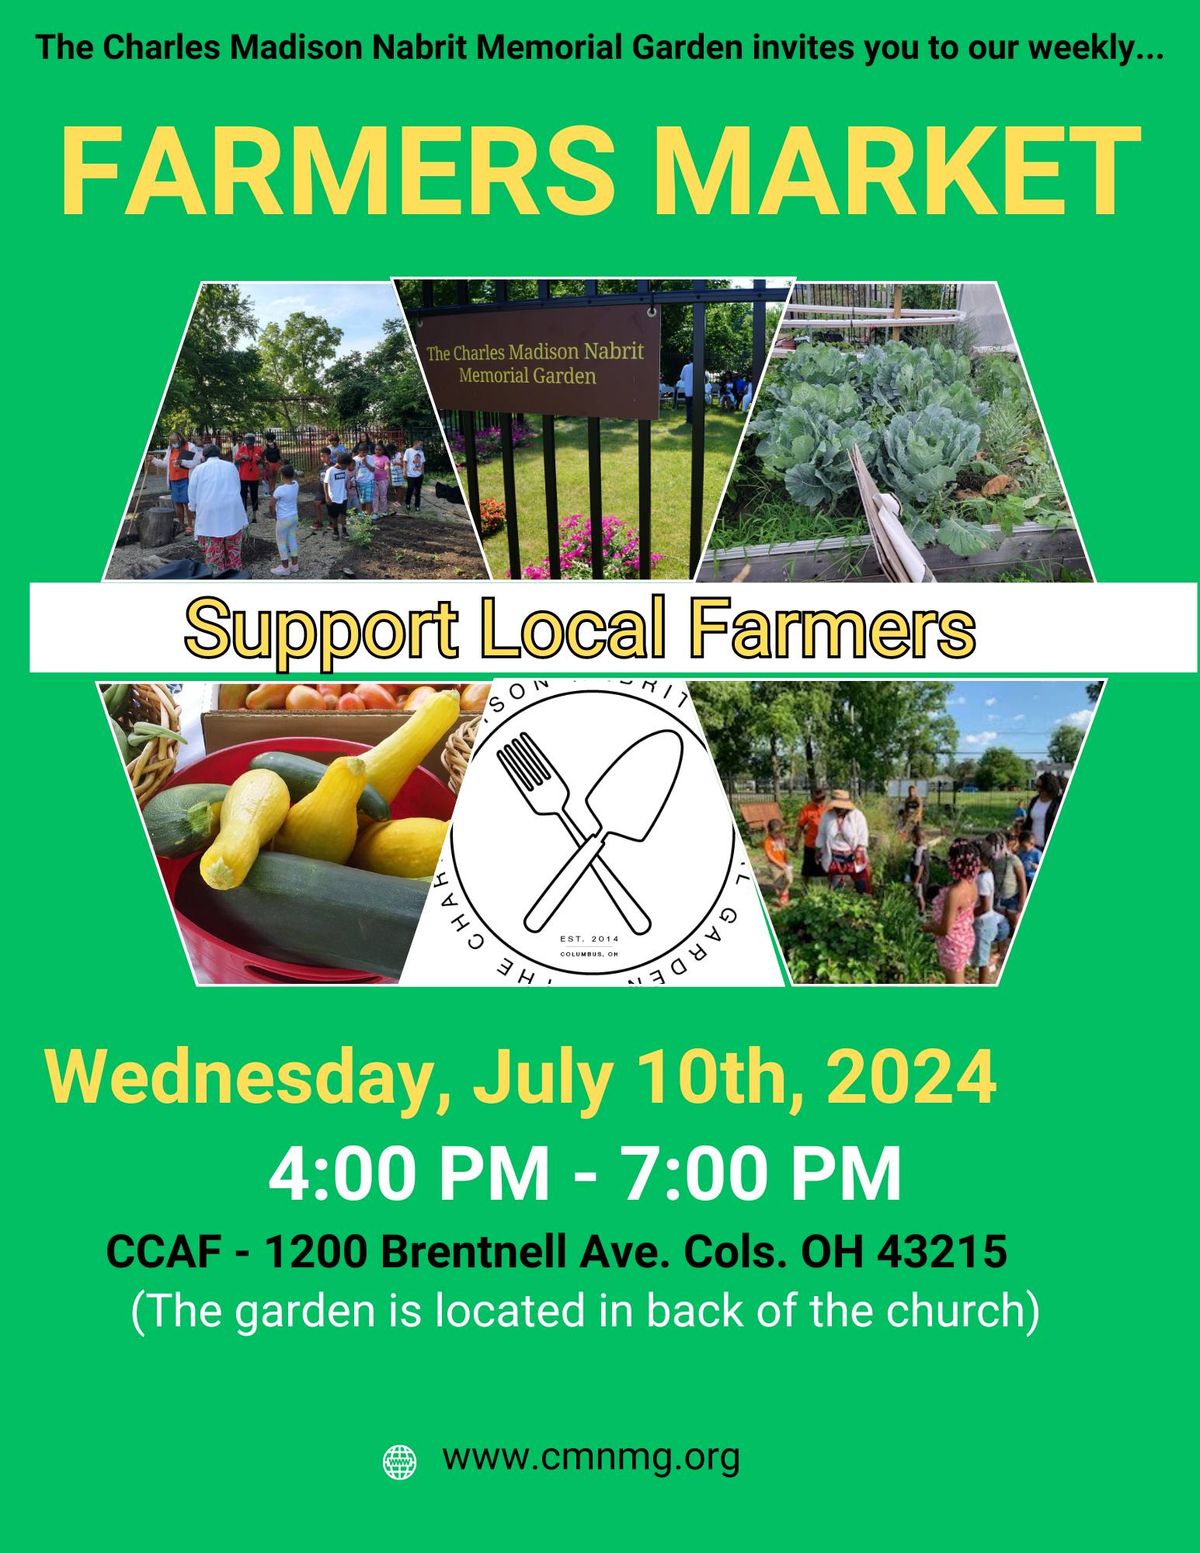 Join us on Wed. July 10th to start the season! Produce is only $1\/lb & we'll be there rain or shine!